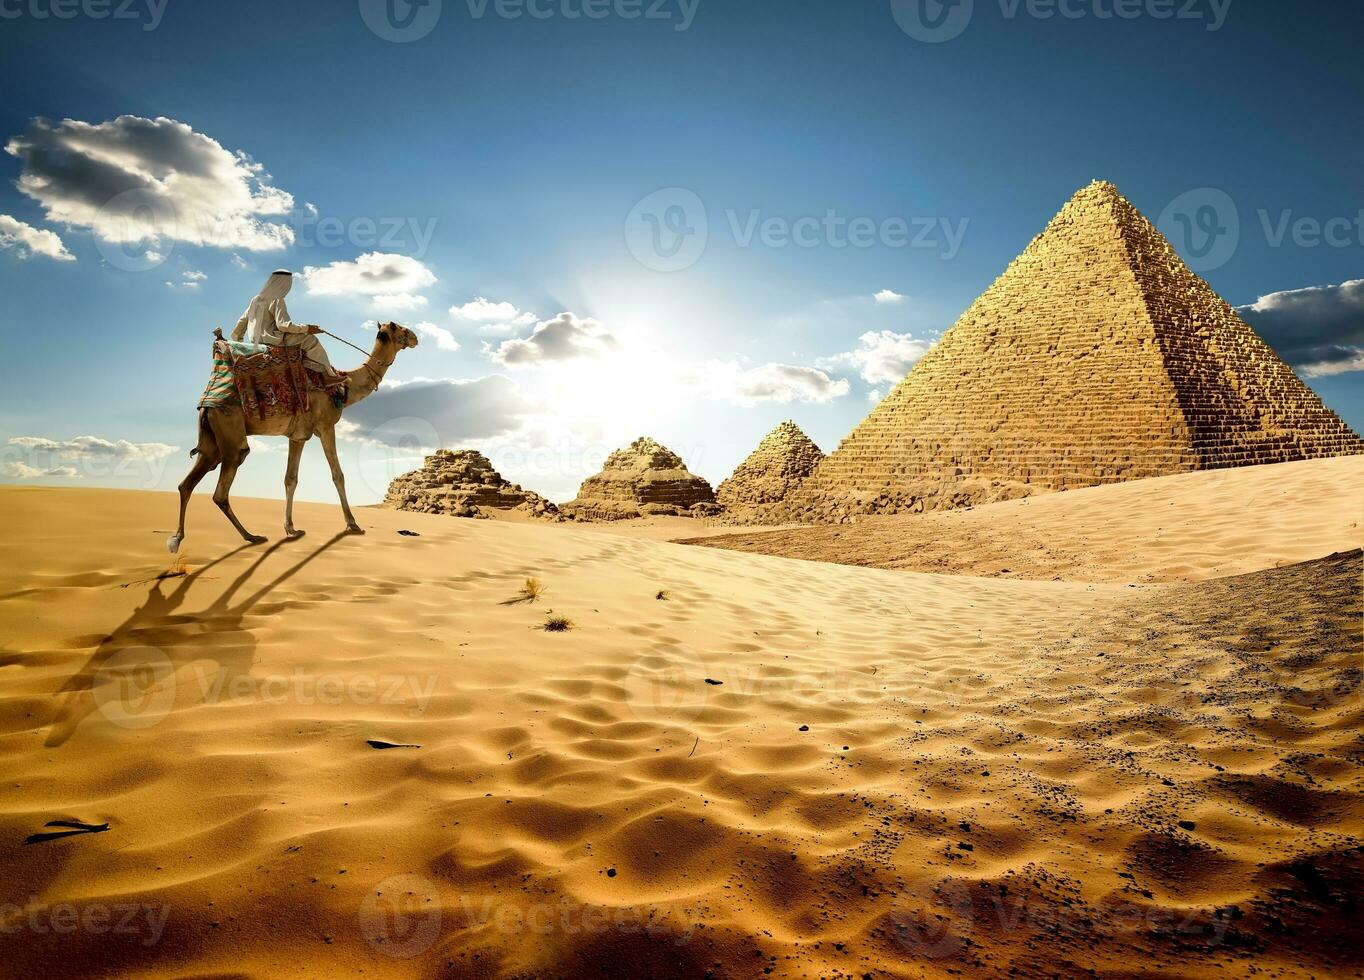 In sands of Egypt photo